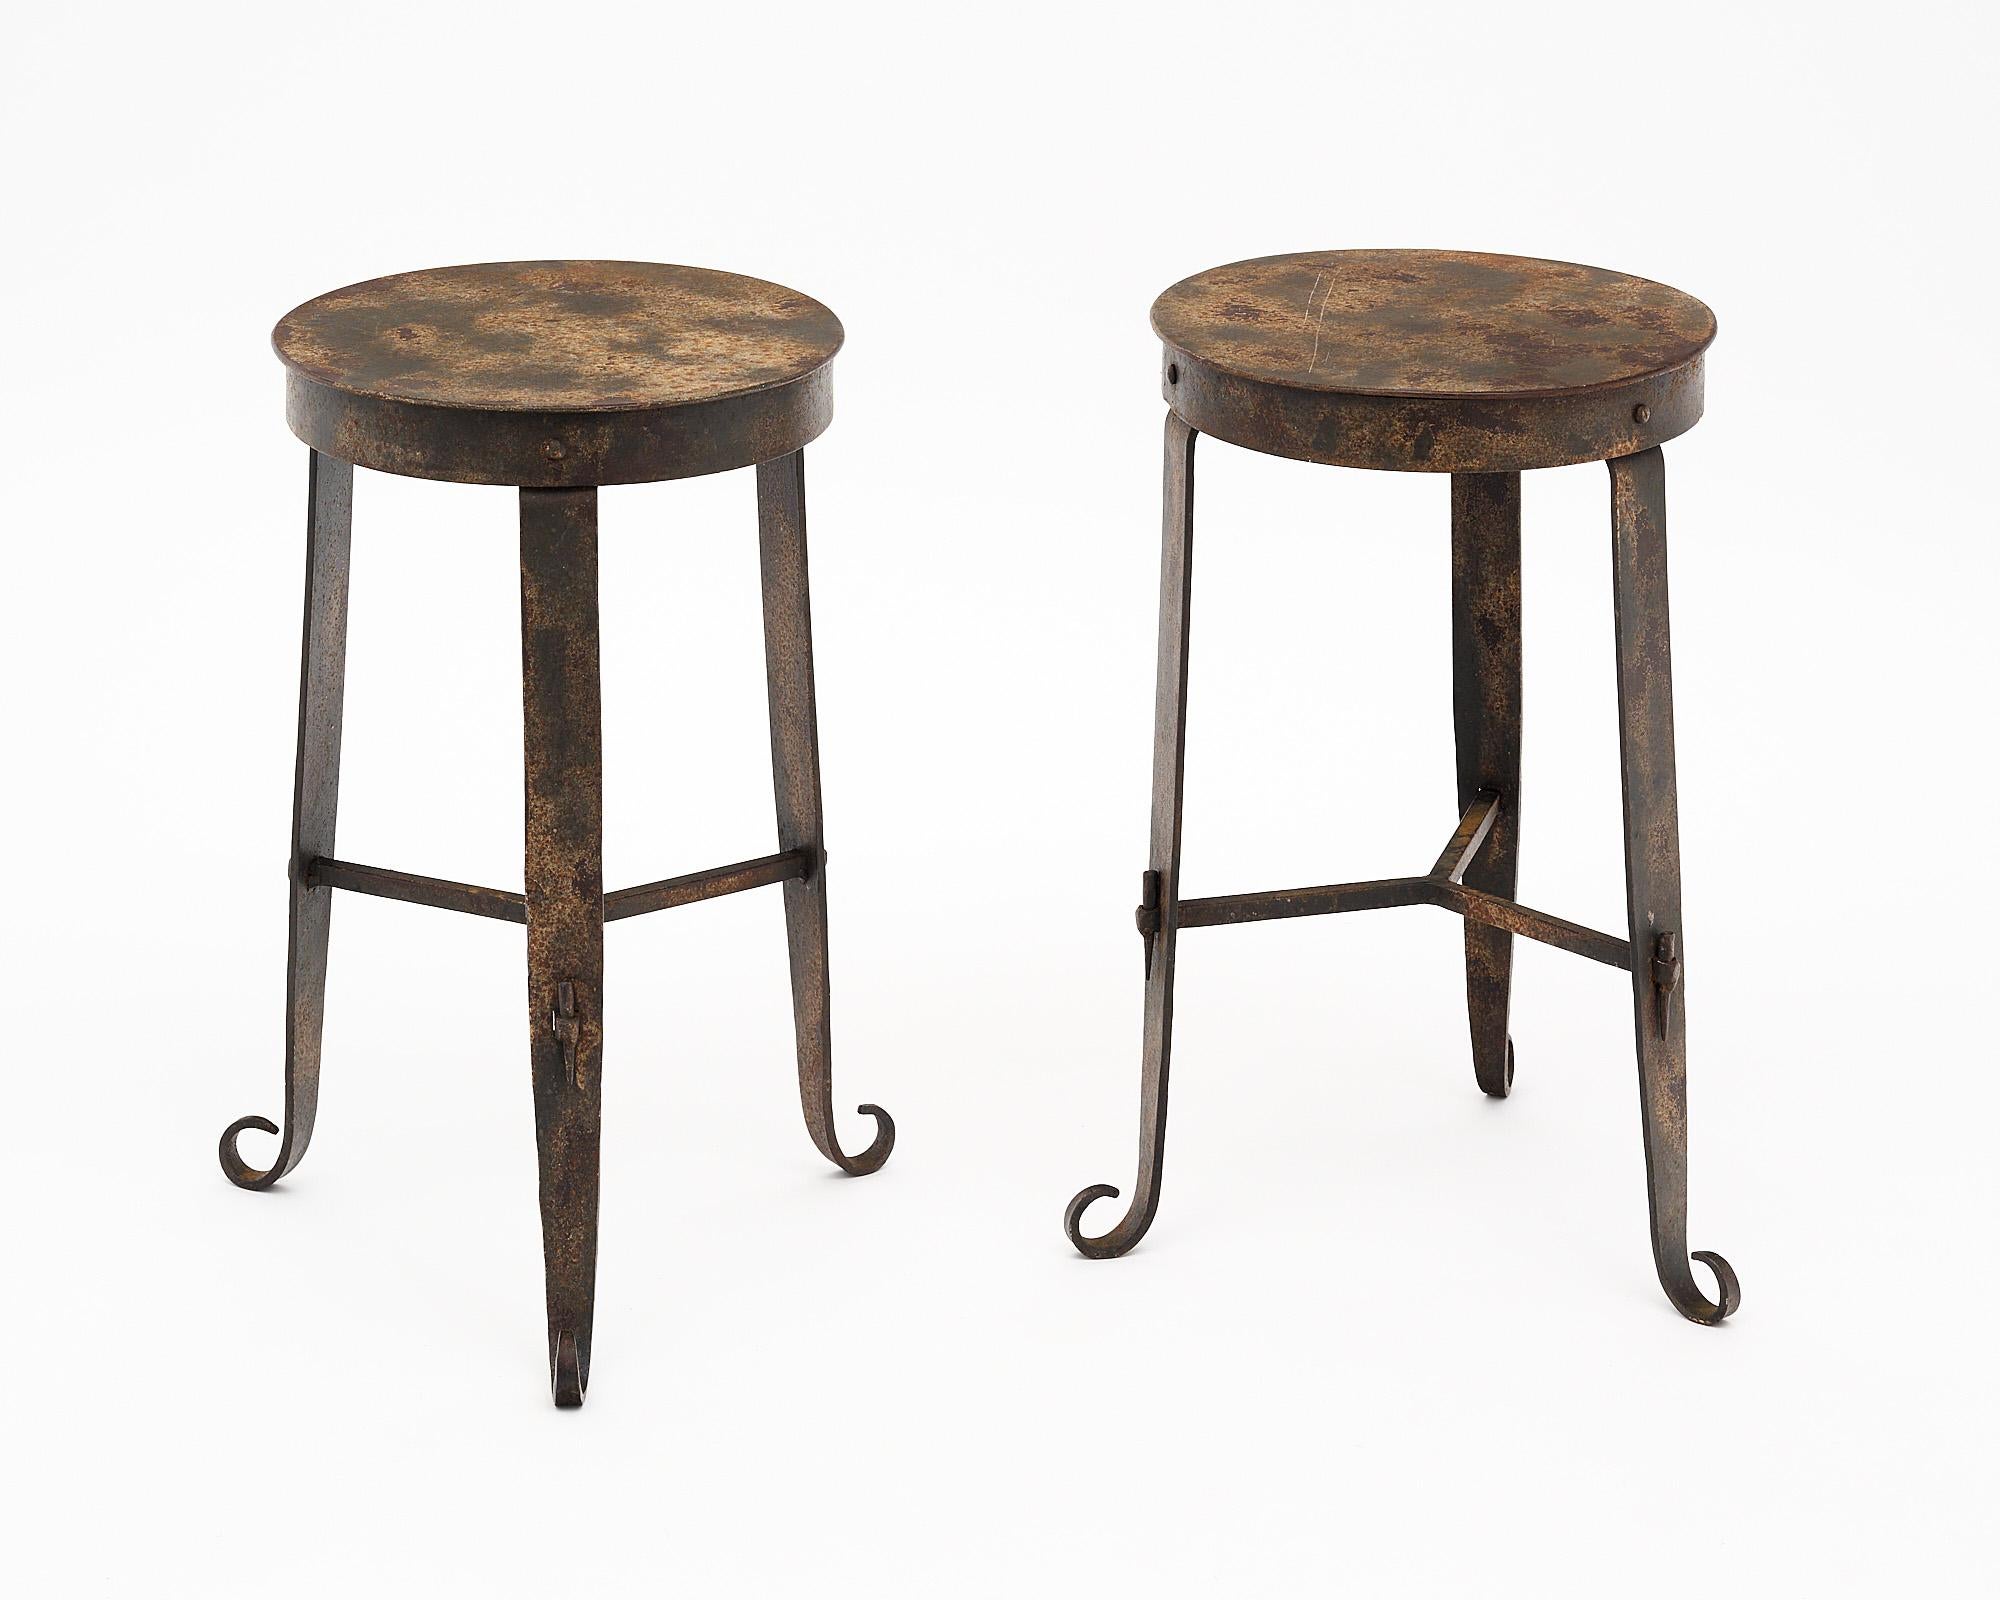 Vintage French side tables or stools made of metal. This pair has the original patina and curved feet at the base of the tripod structure. The diameter listed is for the widest point at the feet, the diameter of the top is 12”.
